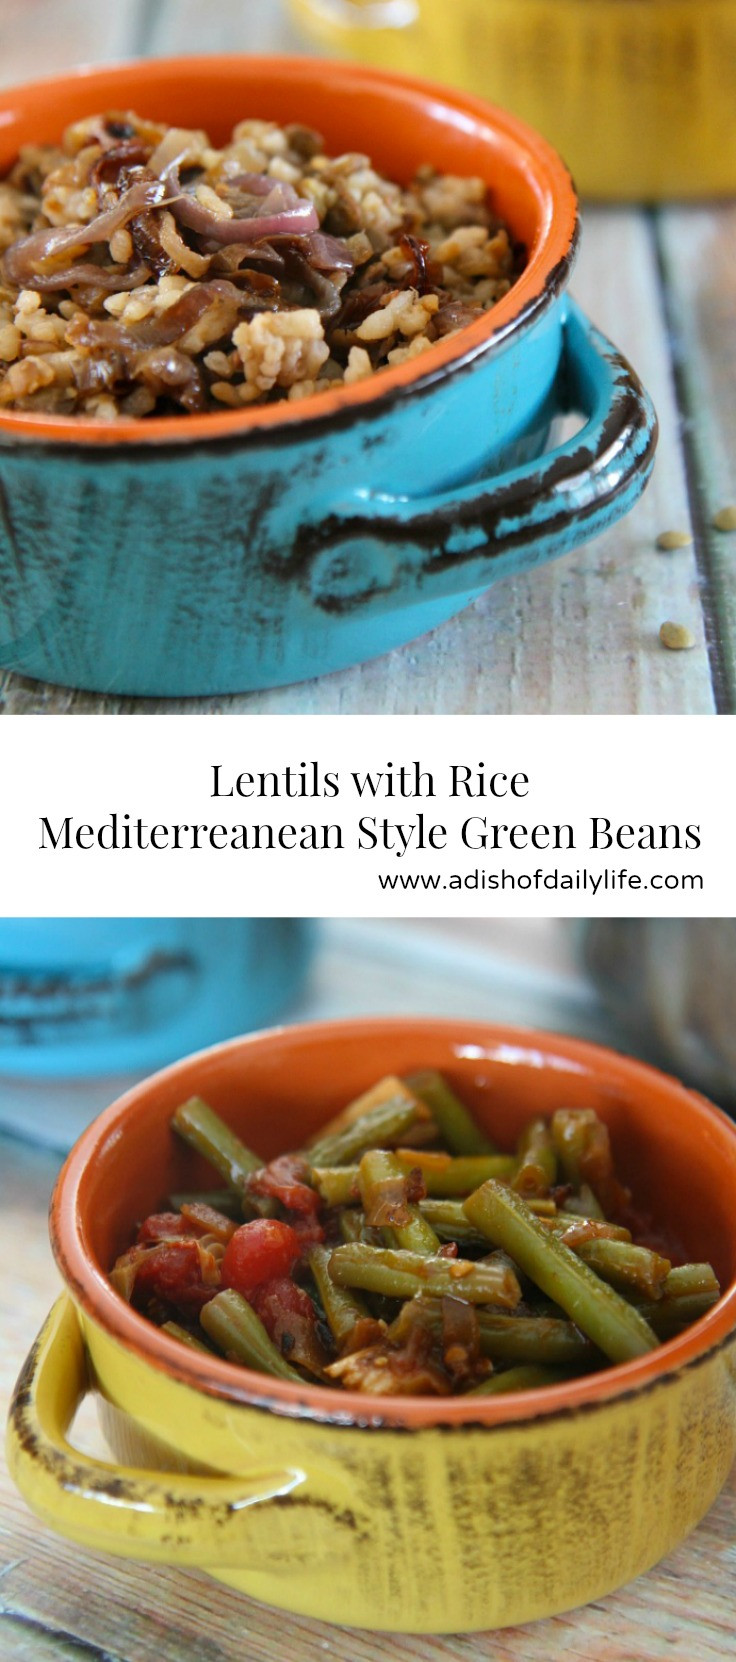 Vegetarian Middle Eastern Recipes
 Middle Eastern Recipes Lentils with Rice and Green Beans